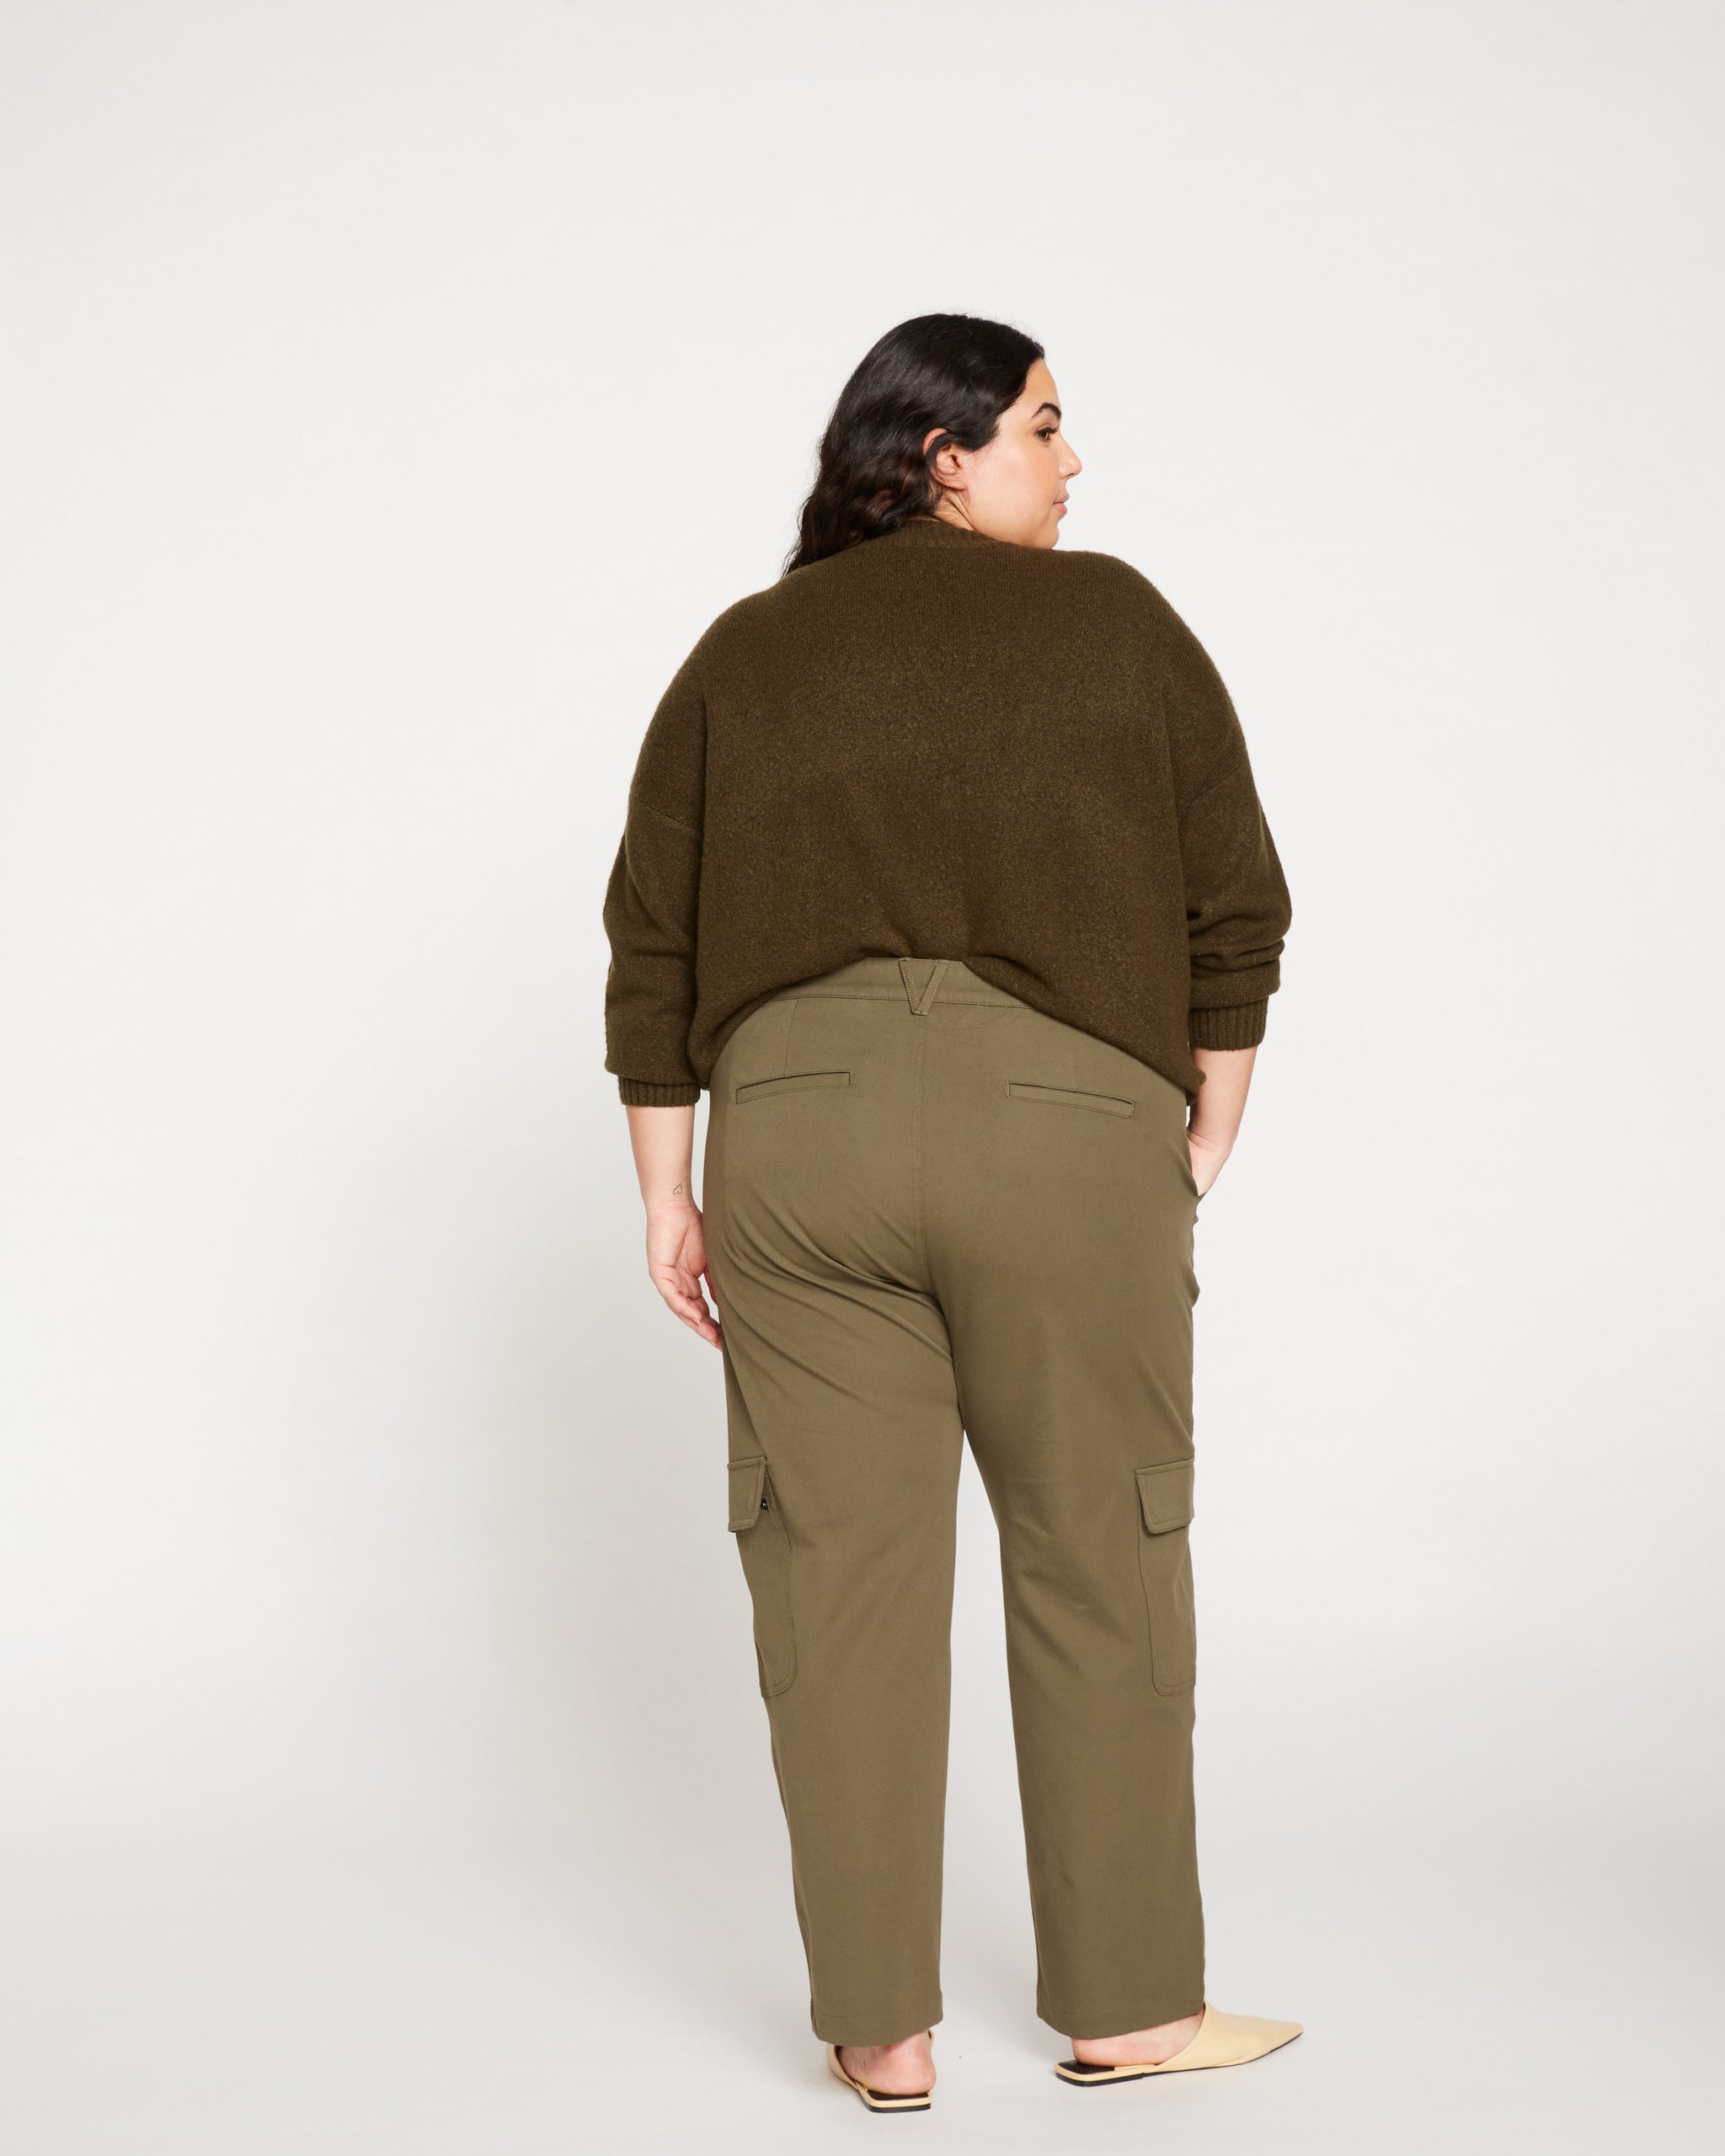 SPANX - NEW & TRENDING: Stretch Twill Cargo Pants! Yes